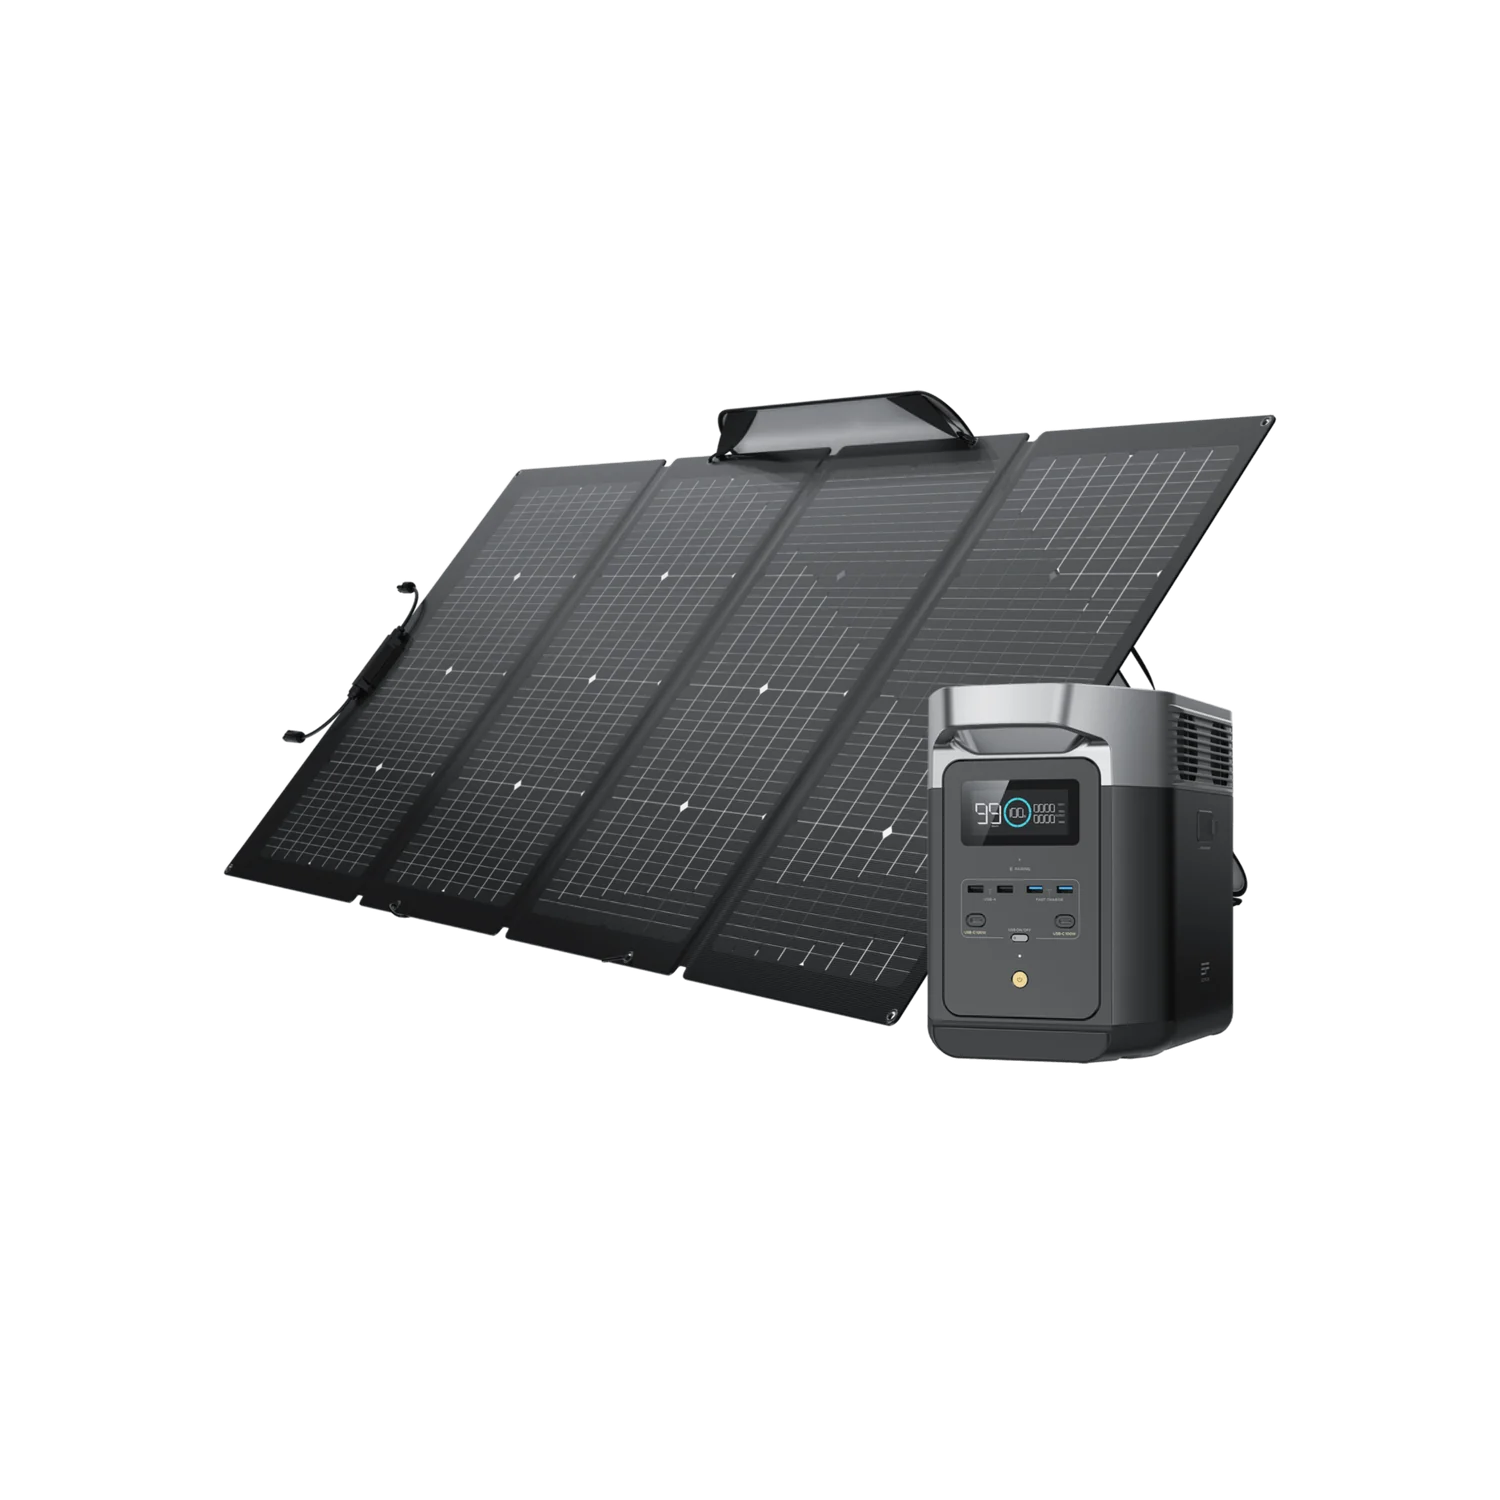 EcoFlow Delta 2 Portable Power Station + 220W Solar Panel. The 220W solar panel is bifacial with 220W on the primary side and 150W on the other side. With this bifacial feature, the solar panel can capture 25% more solar energy and charge the Delta 2 power station much faster.